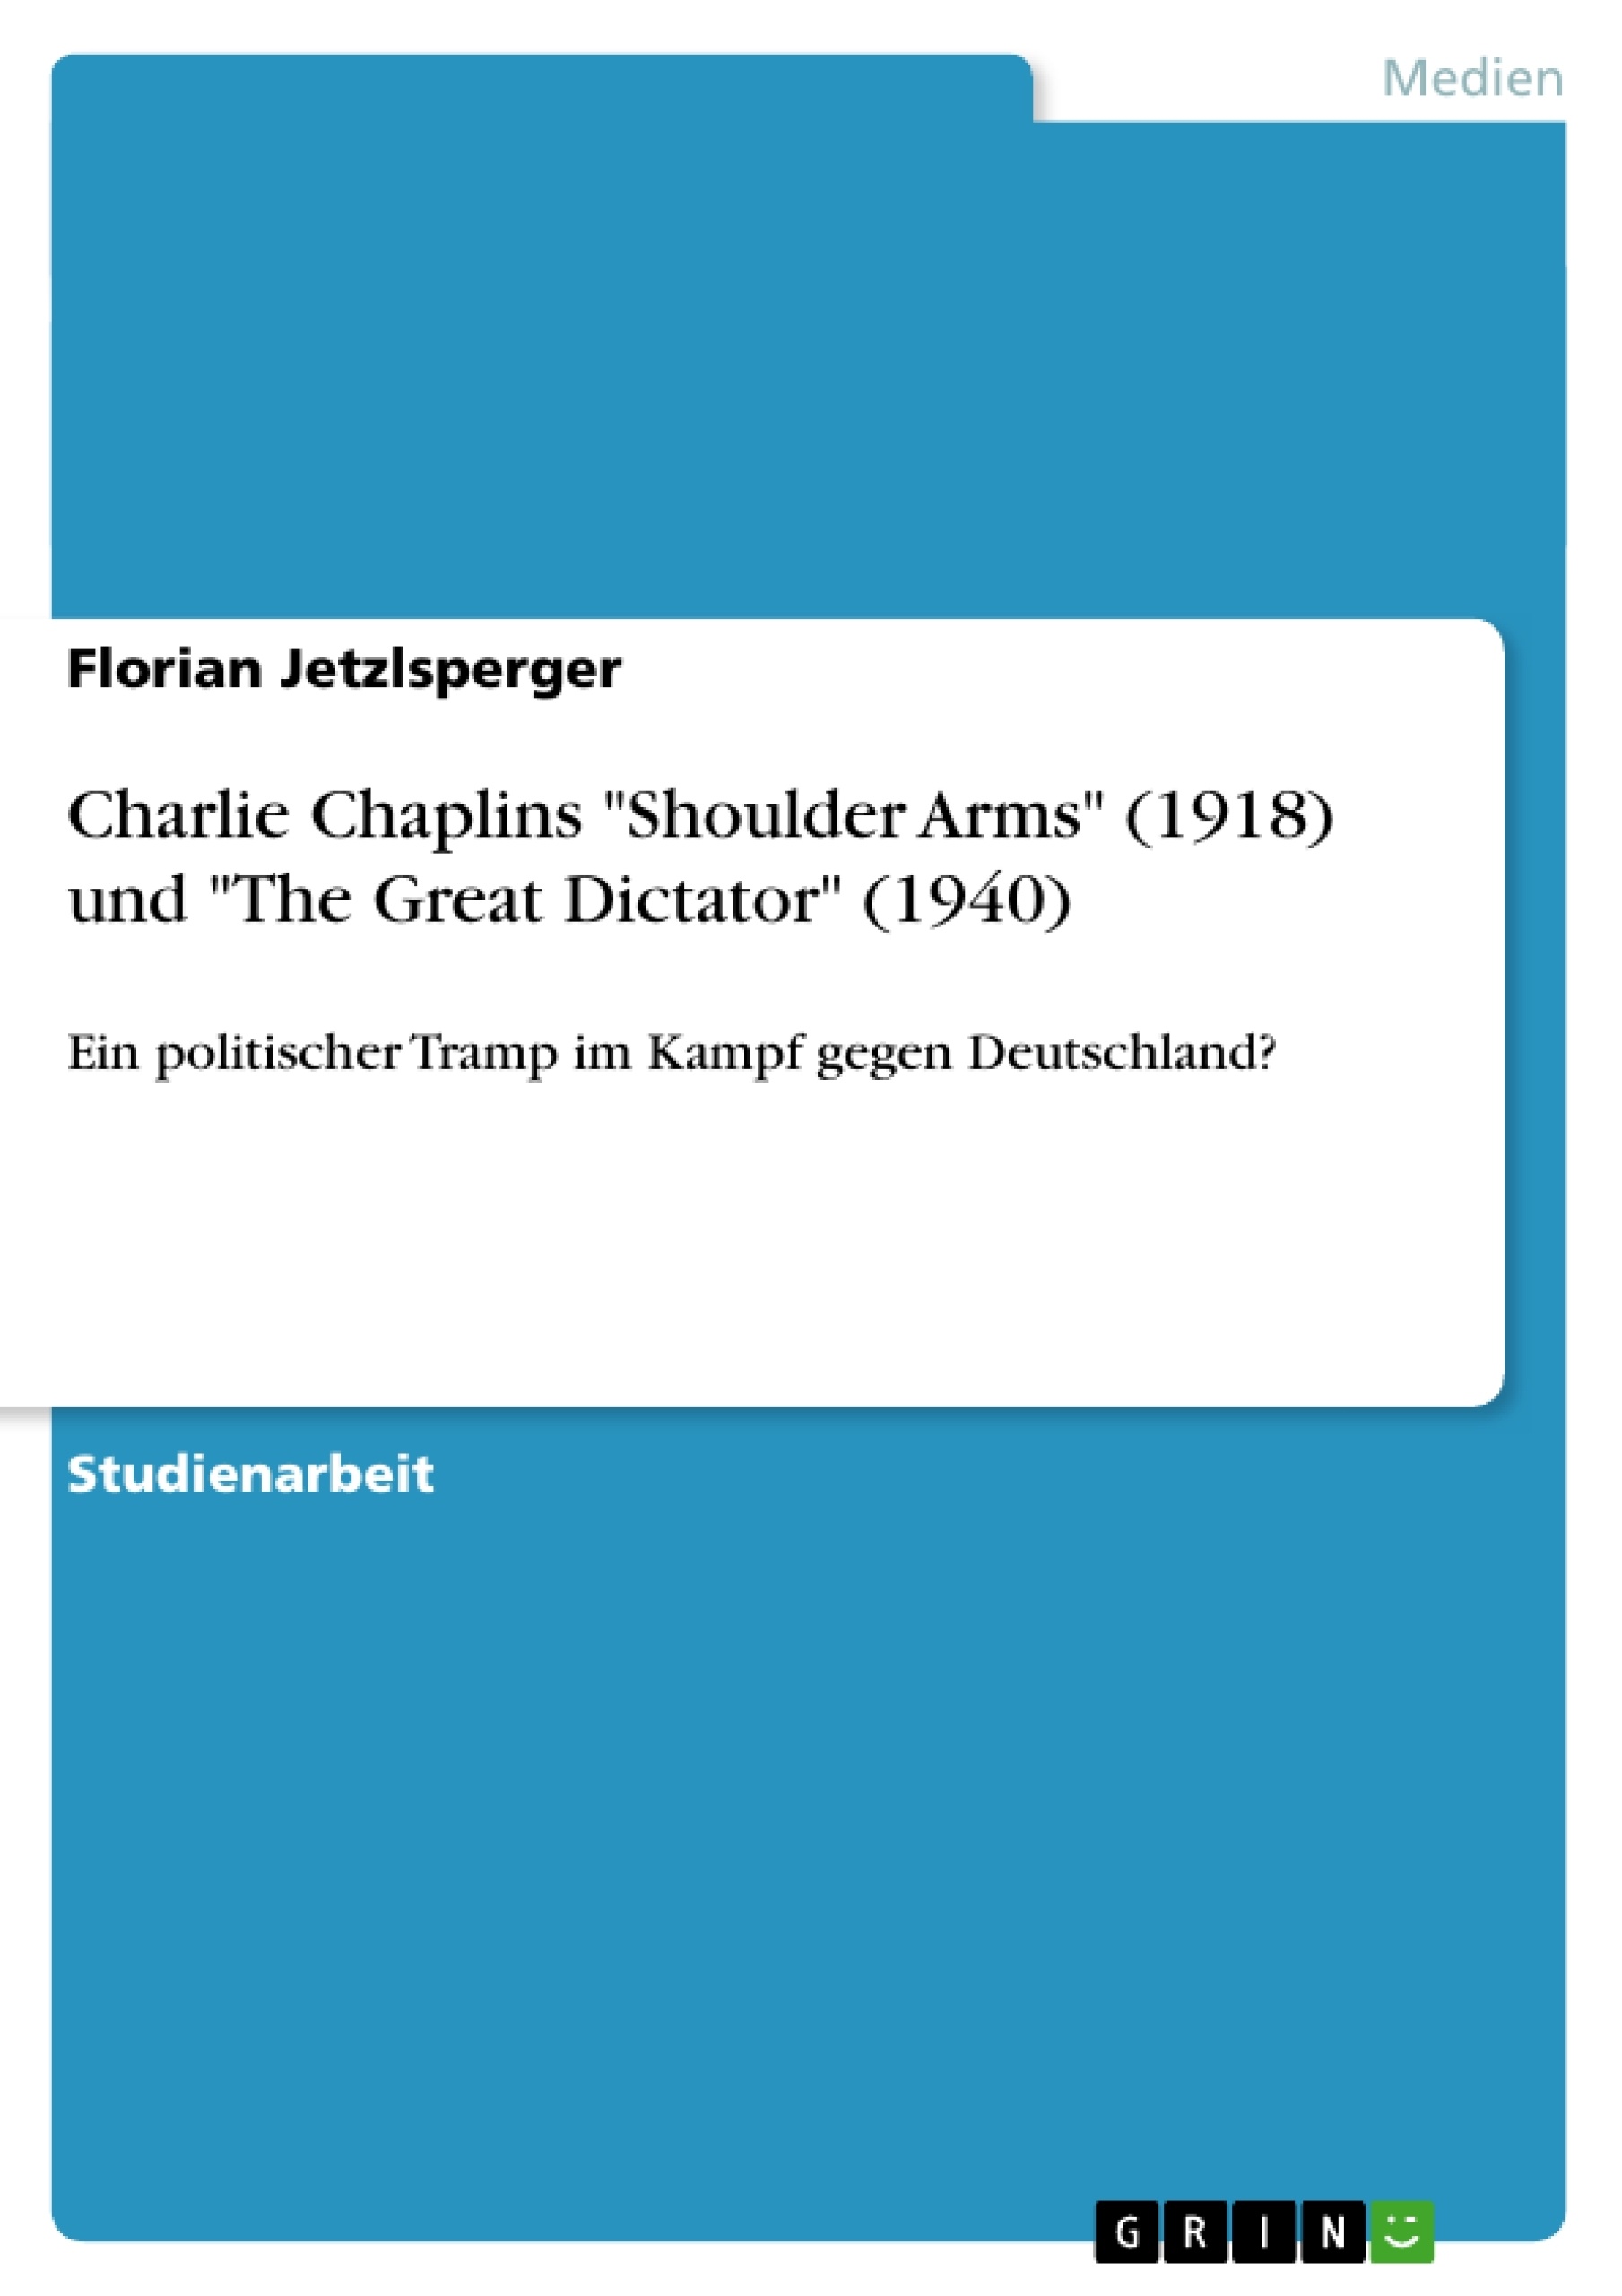 Title: Charlie Chaplins "Shoulder Arms" (1918) und "The Great Dictator" (1940)